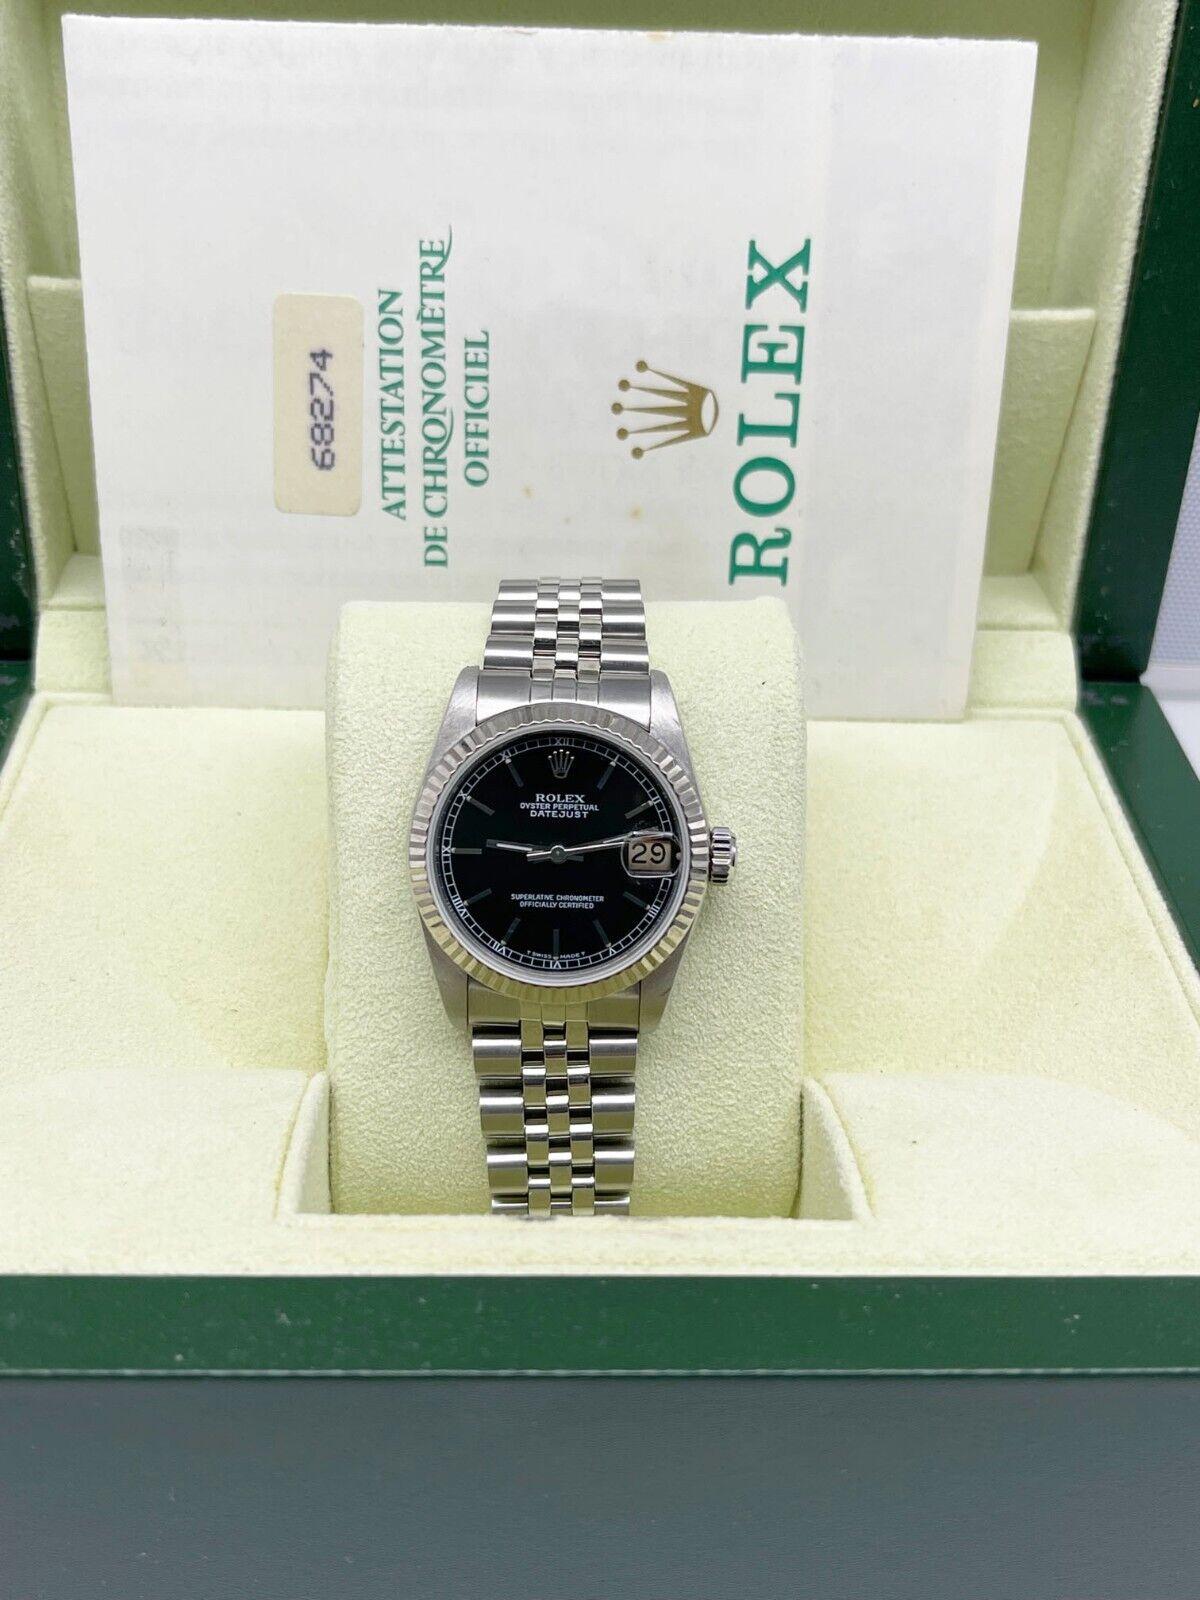 
Style Number: 68274

Serial: R785***

Model: Midsize Datejust

Case Material: Stainless Steel

Band: Stainless Steel

Bezel: 18K White Gold

Dial: Black 

Face: Sapphire Crystal

Case Size: 31mm 

Includes: 

-Rolex Box, Paper, and